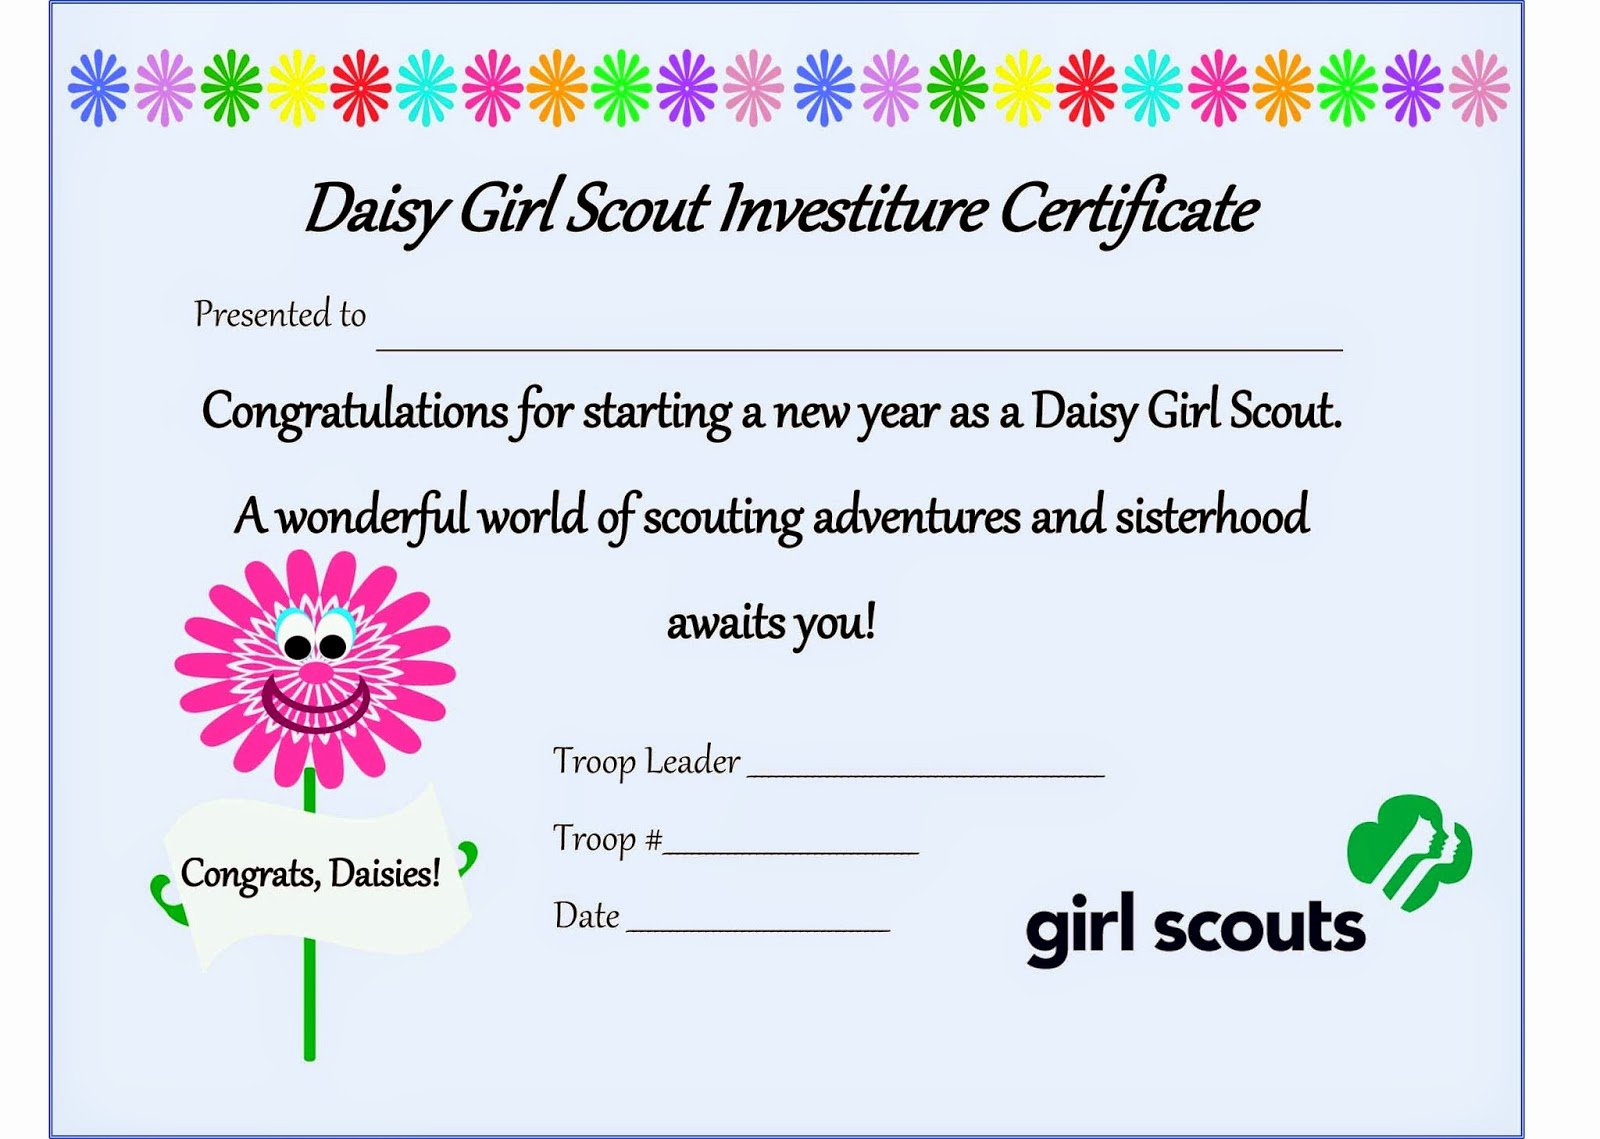 Girl Scout Bridging Certificate Template Best Of A Mindful Momma Girl Scouting Momma